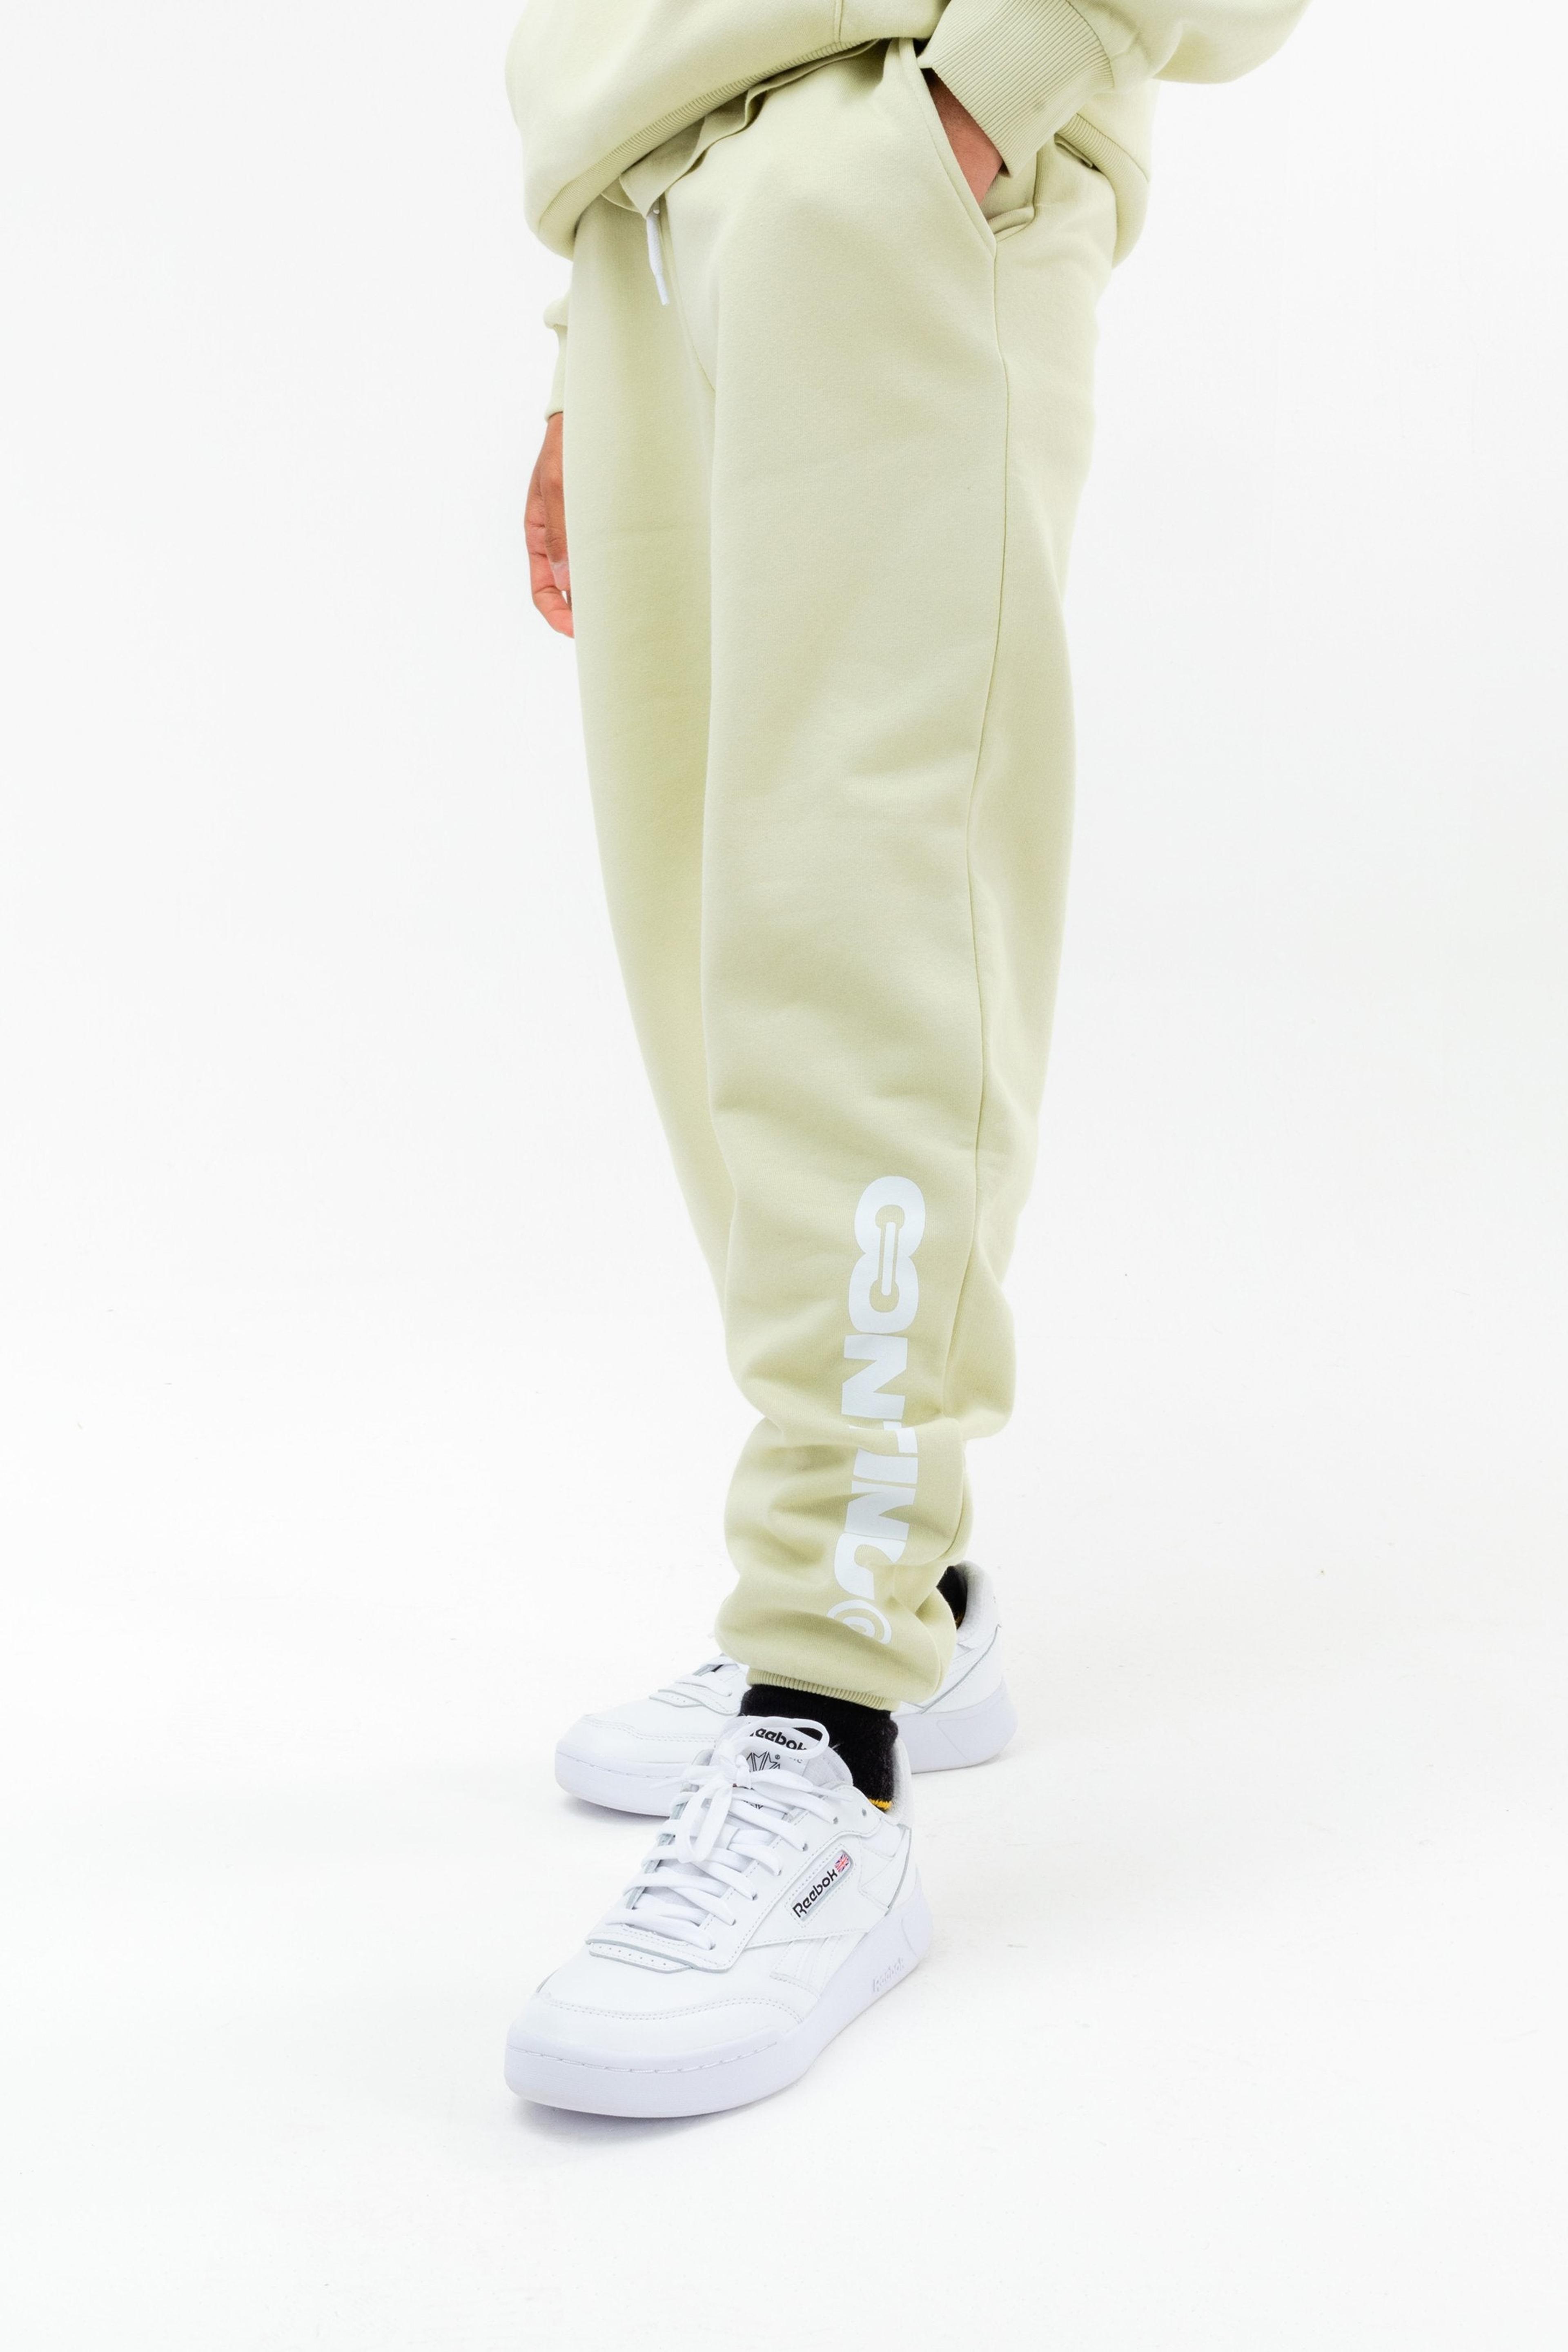 Alternate View 2 of CONTINU8 LIGHT GREEN JOGGERS